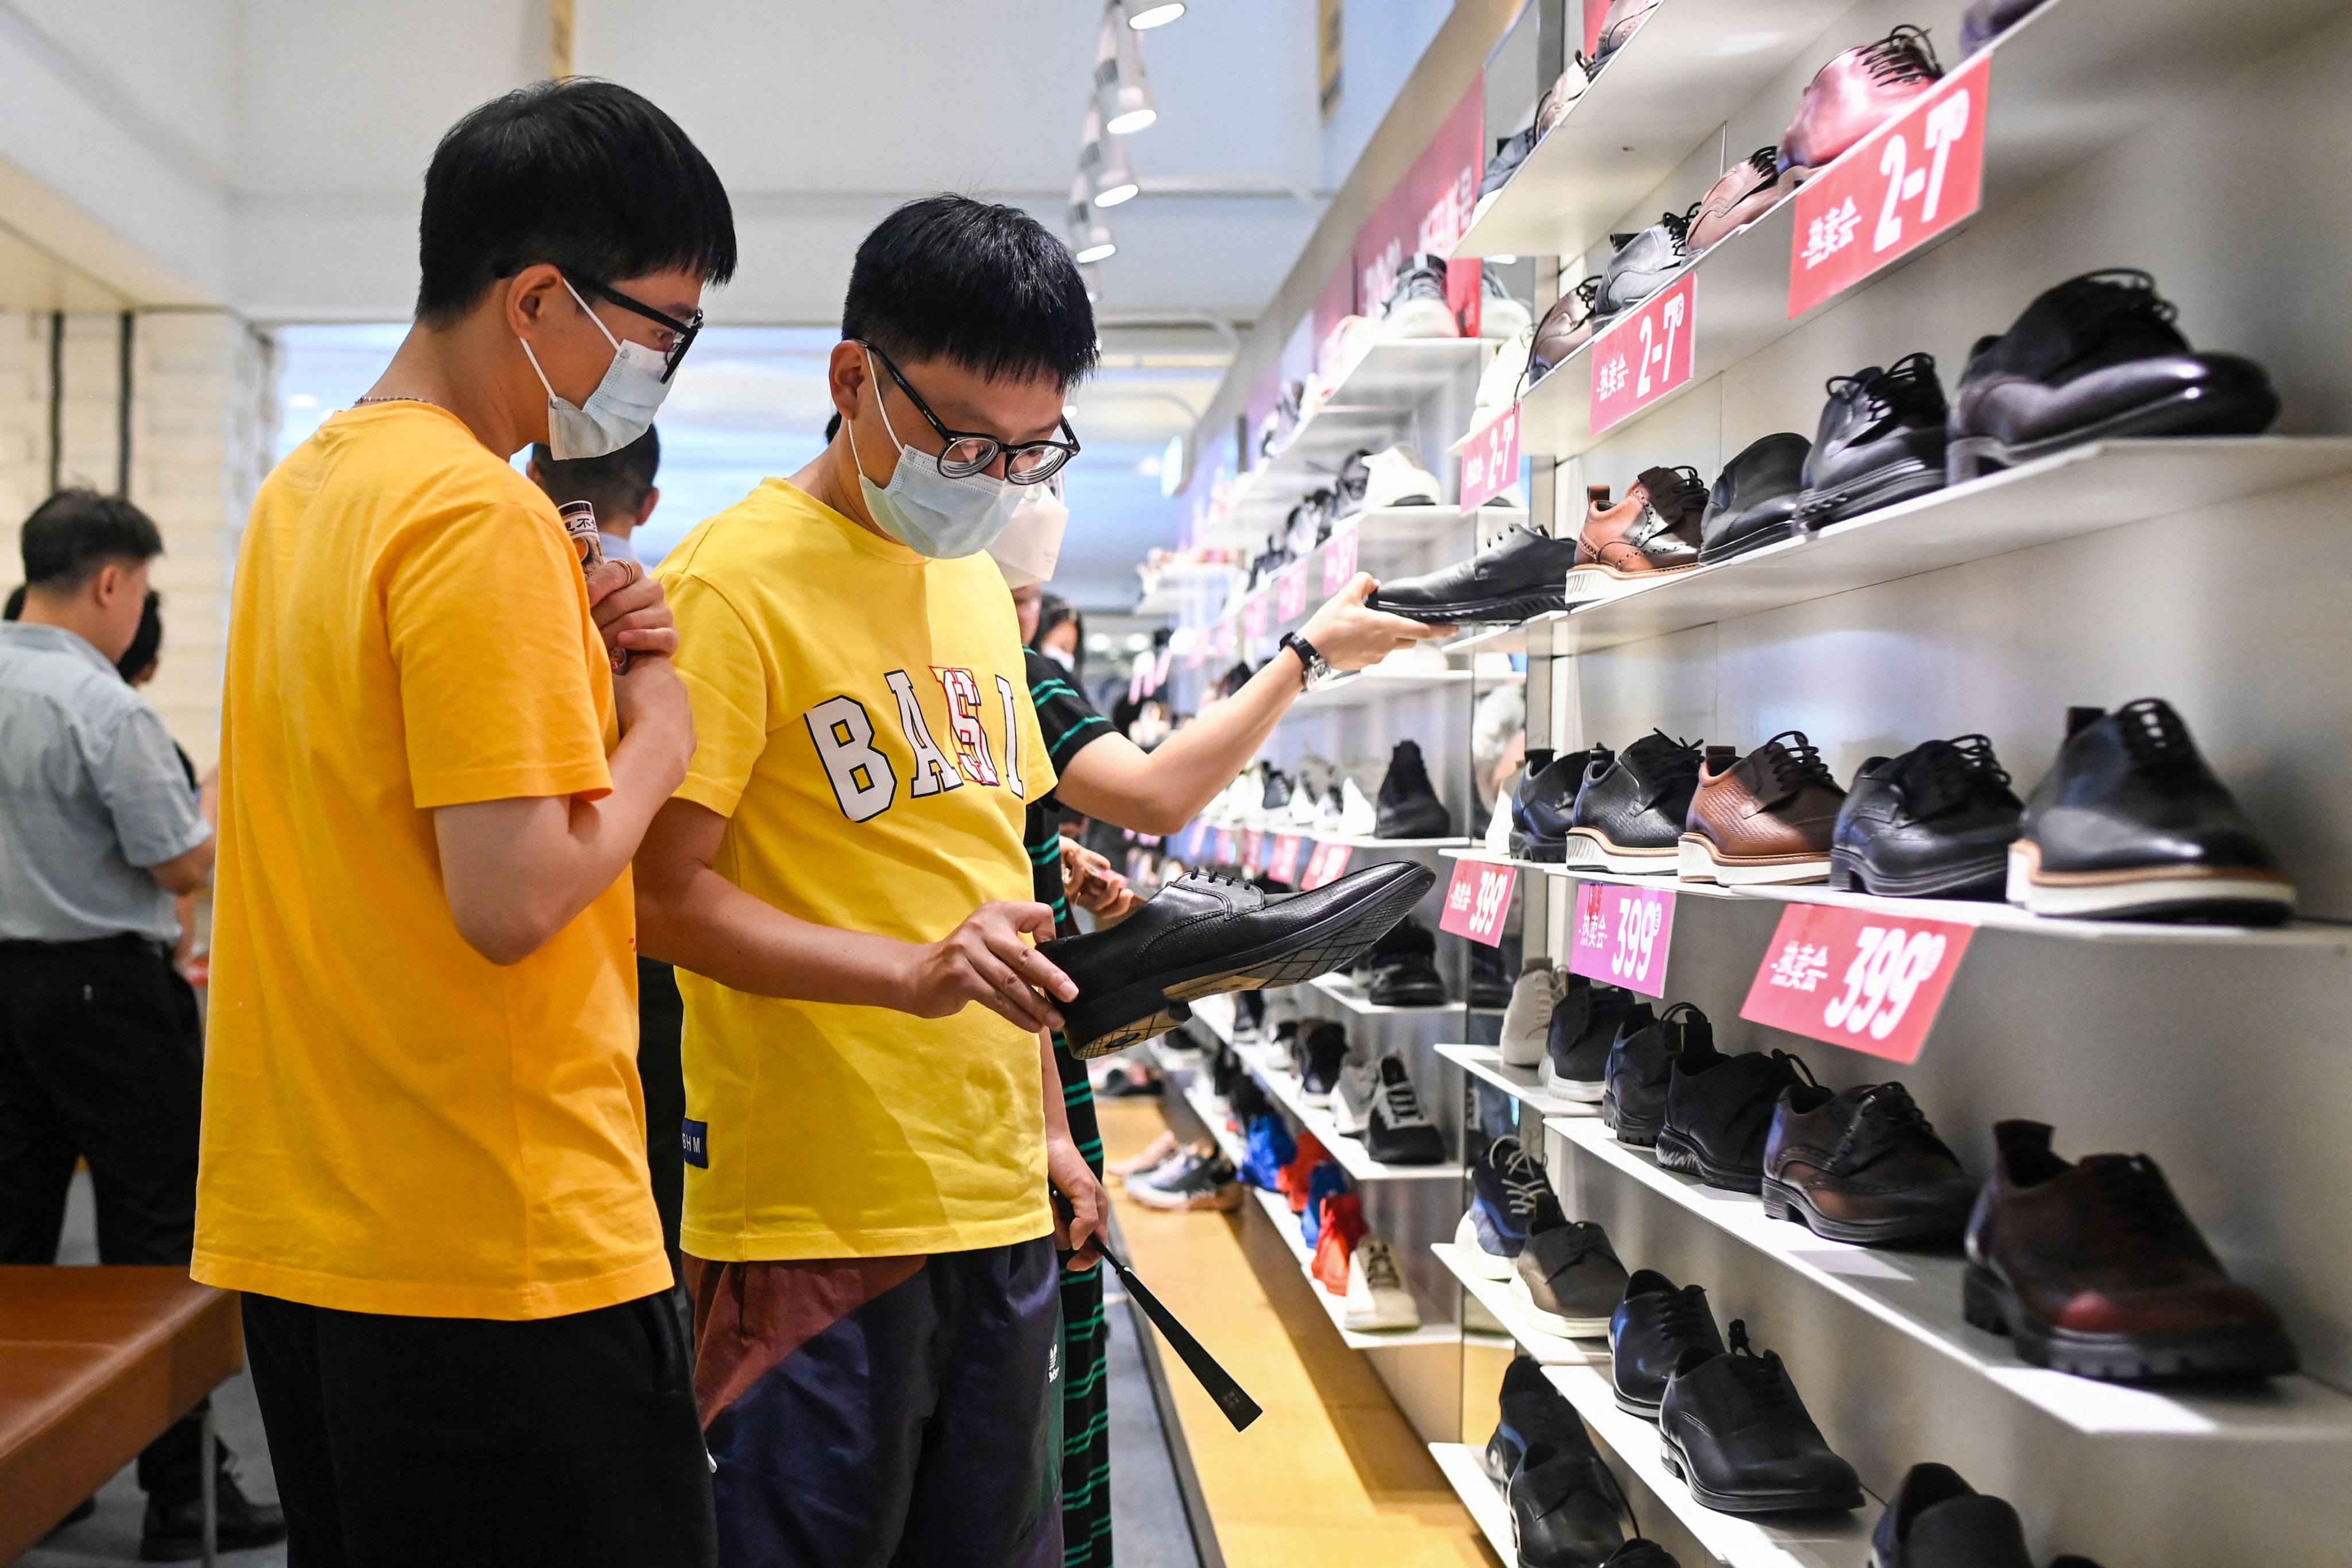 China’s retail sales rose by 12.7 per cent in May, below the expected rise of 13.6 per cent, according to Wind, a leading provider of financial information services in China, and down from the 18.4 per cent increase in April. Photo: AFP